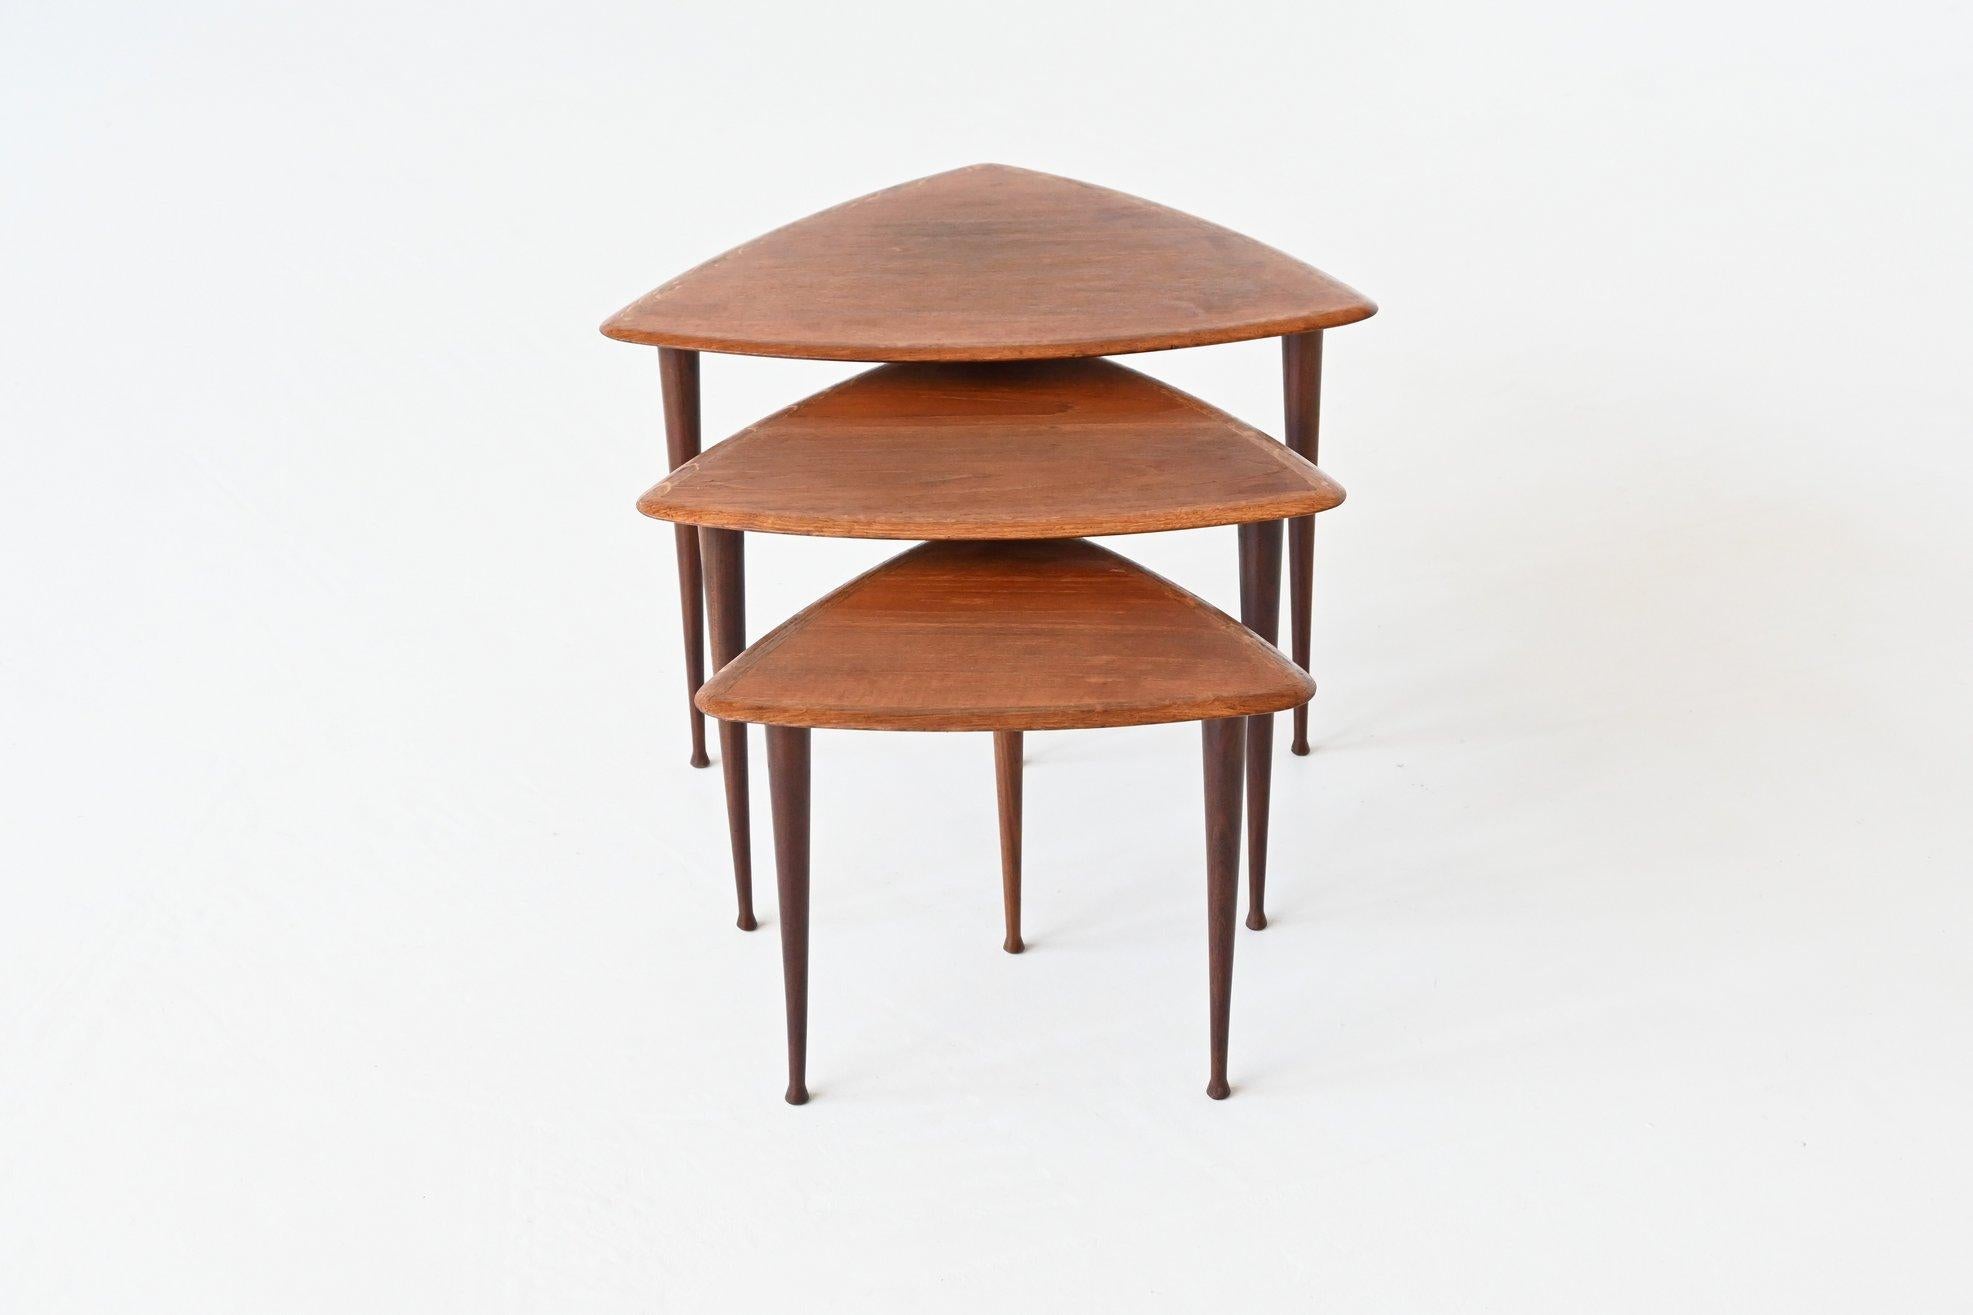 Beautiful shaped set of three nesting tables in the manner of Poul Jensen by Selig, Denmark 1960. These very nice triangle shaped tables are made of teak wood, the feet are solid and the tops are veneered. They give a minimalist look due to the